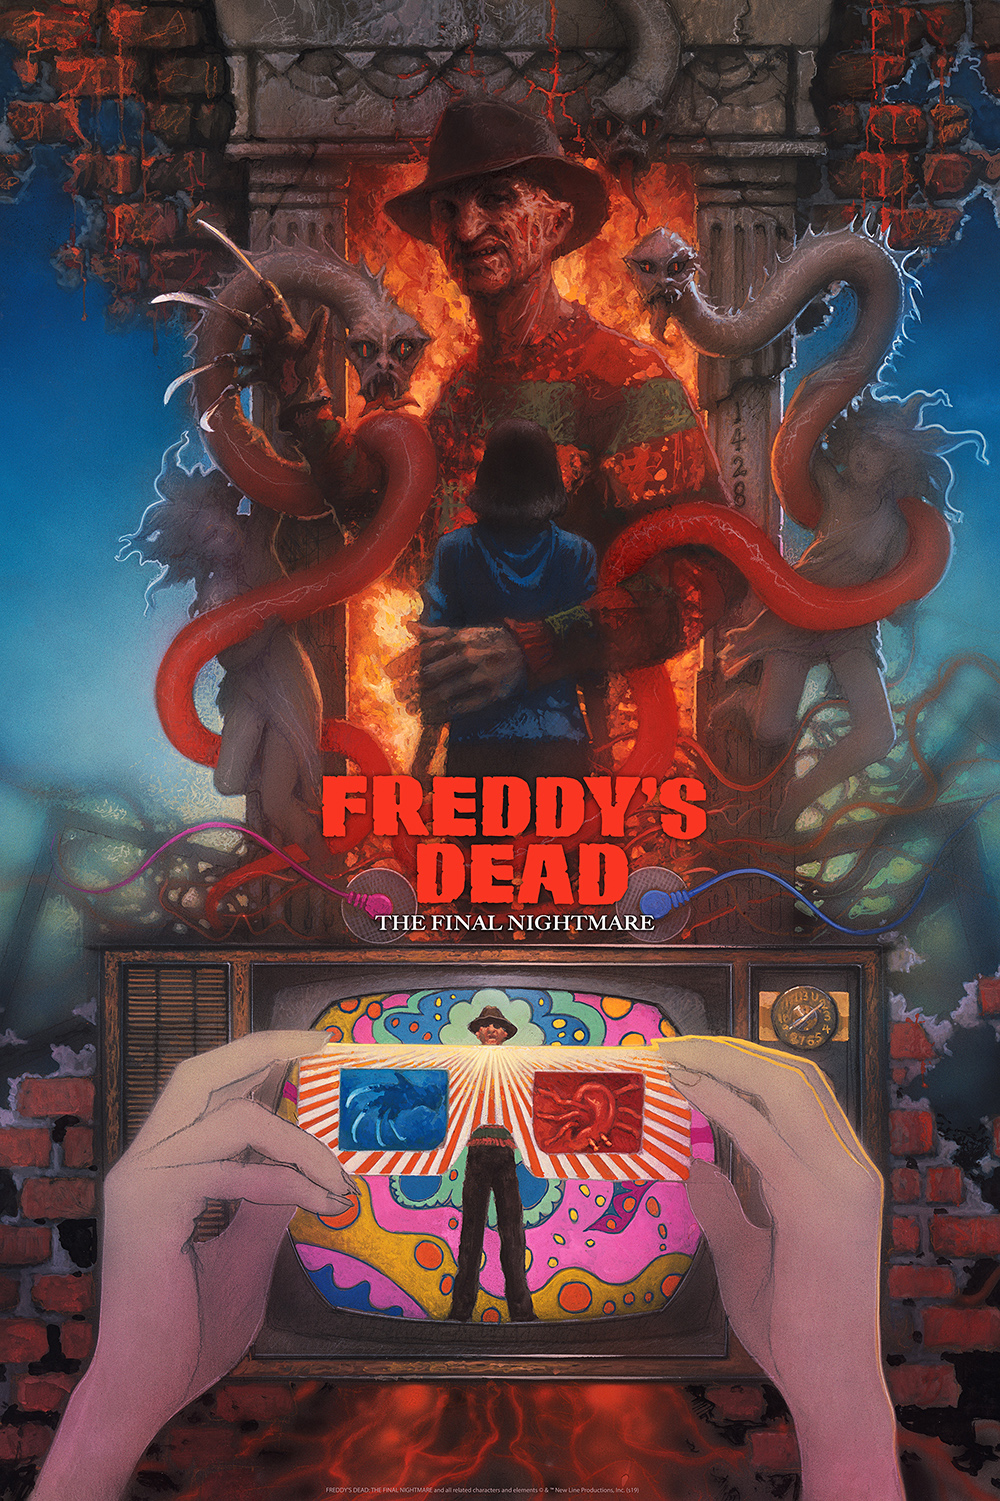 FREDDY’S DEAD The Final Nightmare – BNG print